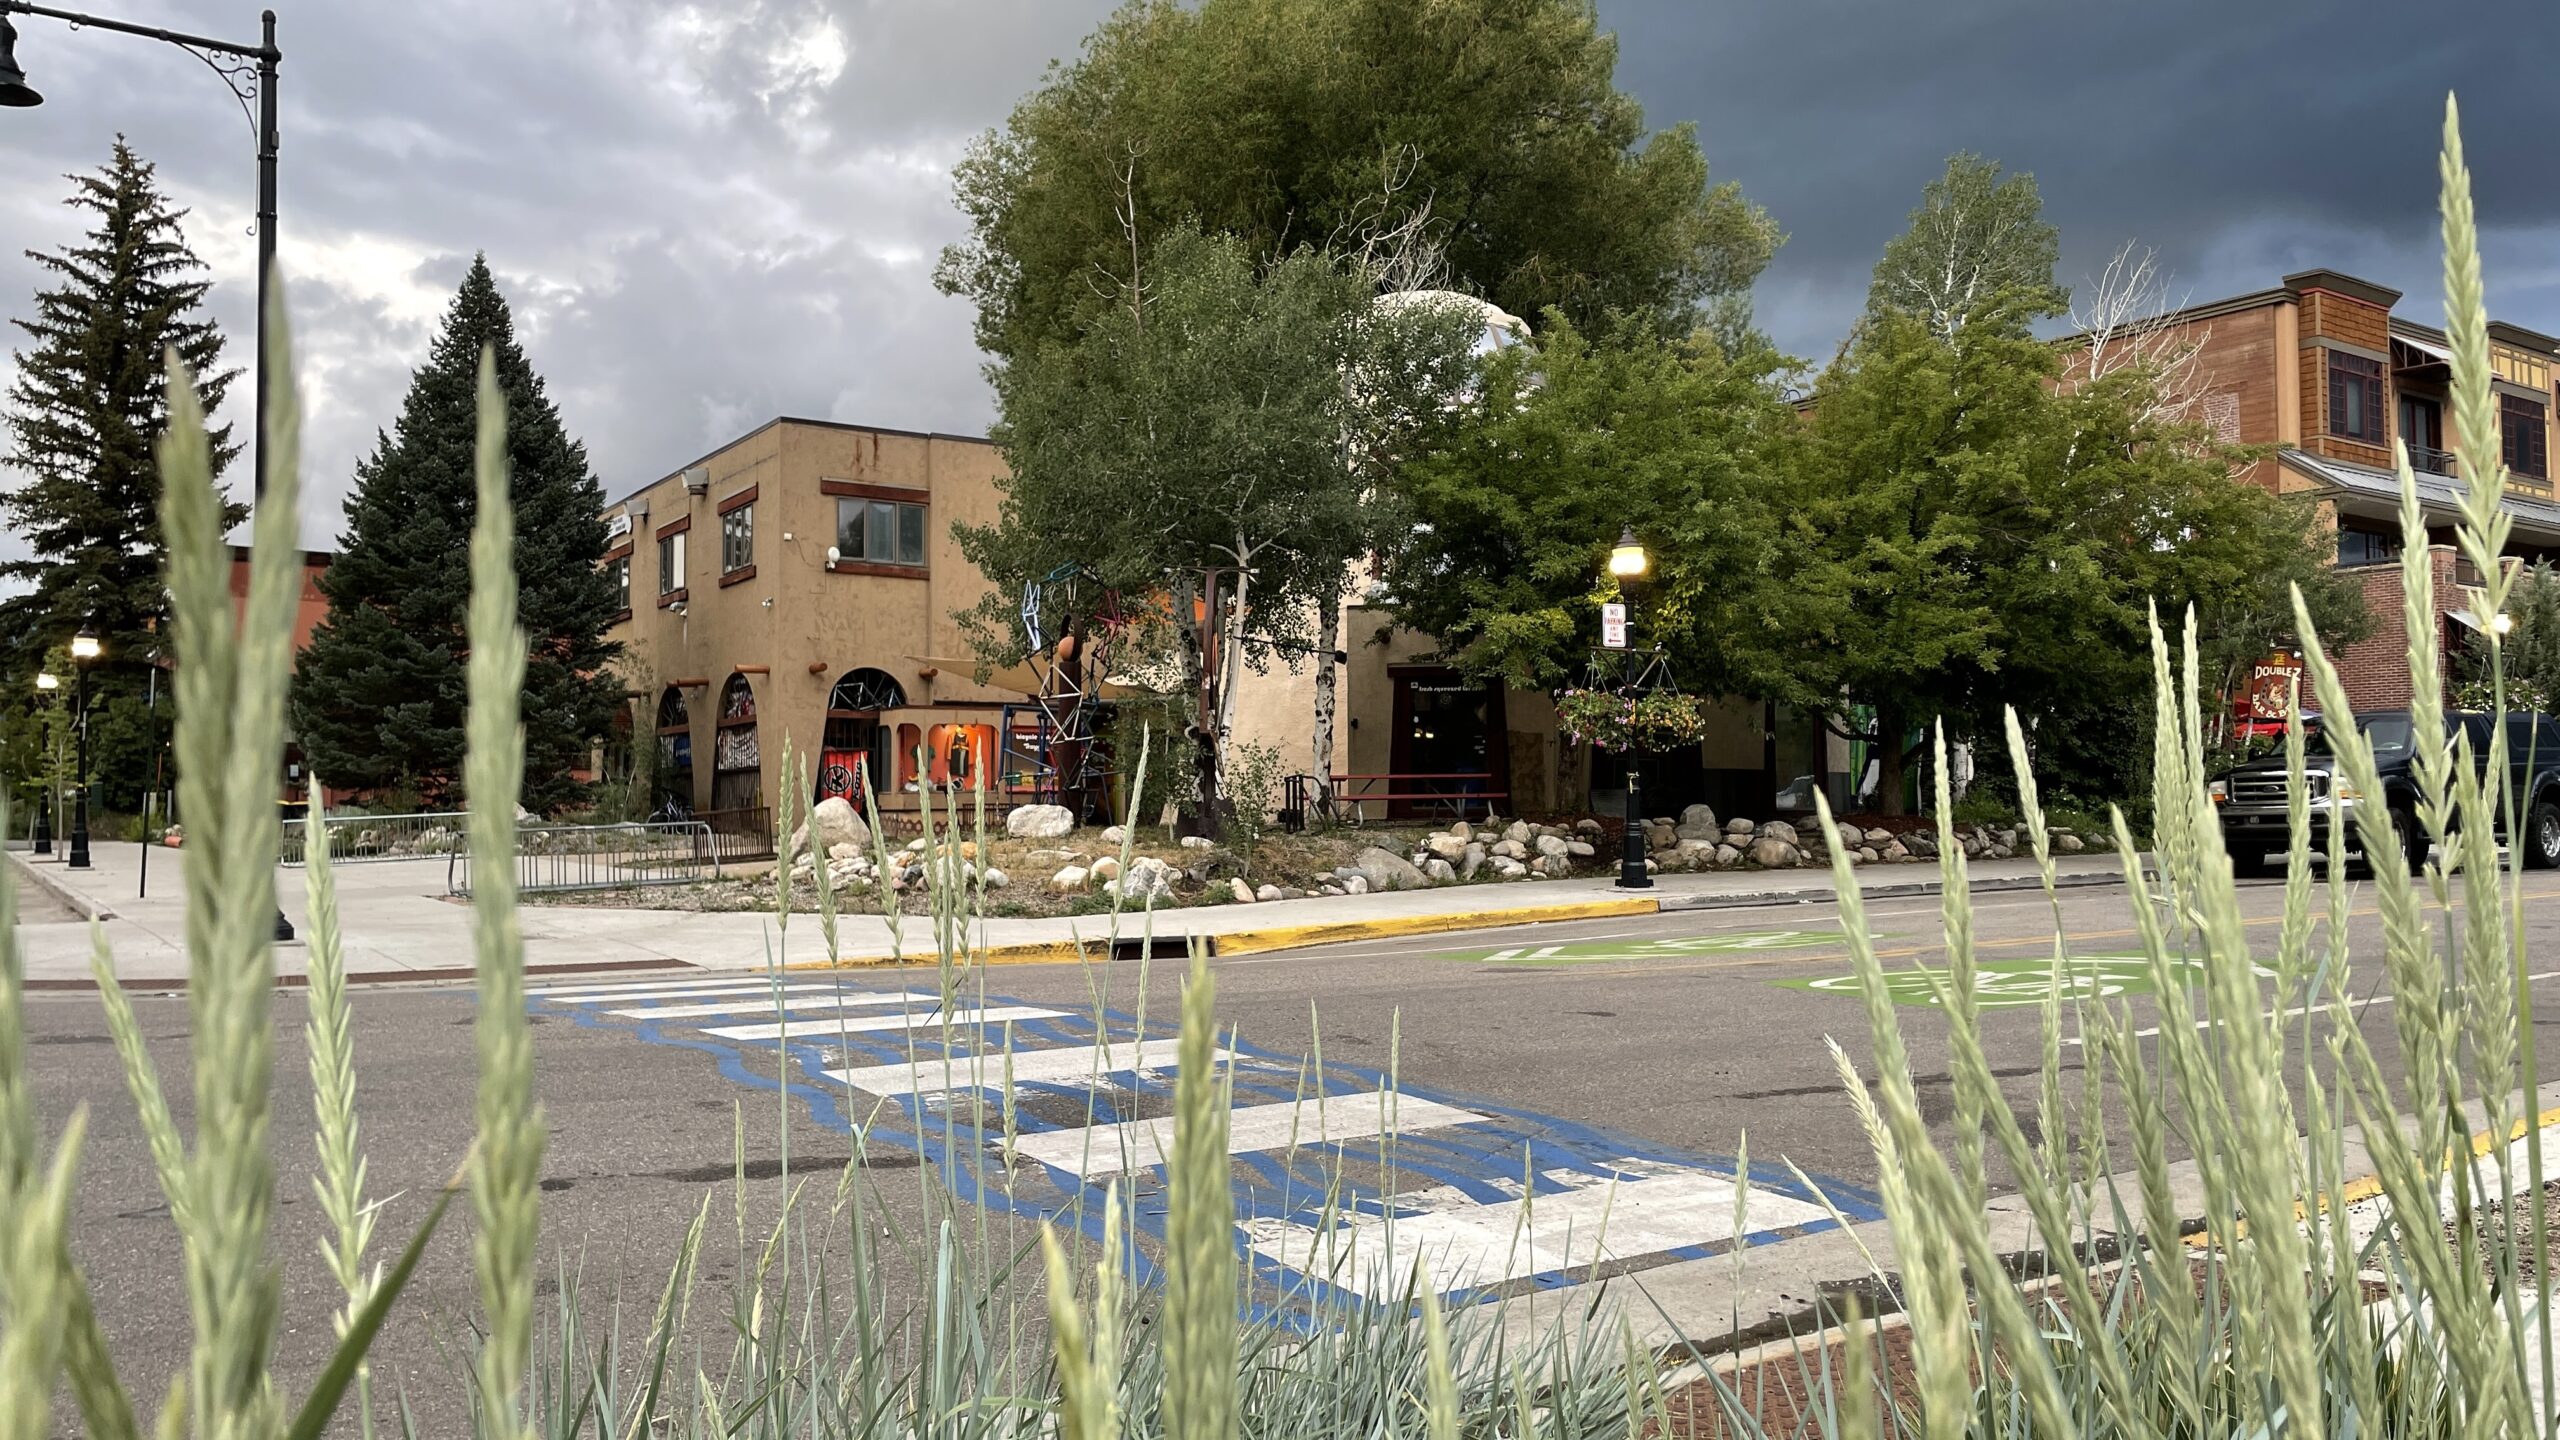 A crosswalk and sidewalks in Steamboat Springs, CO, to illustrate how walking is a great way to get into town.